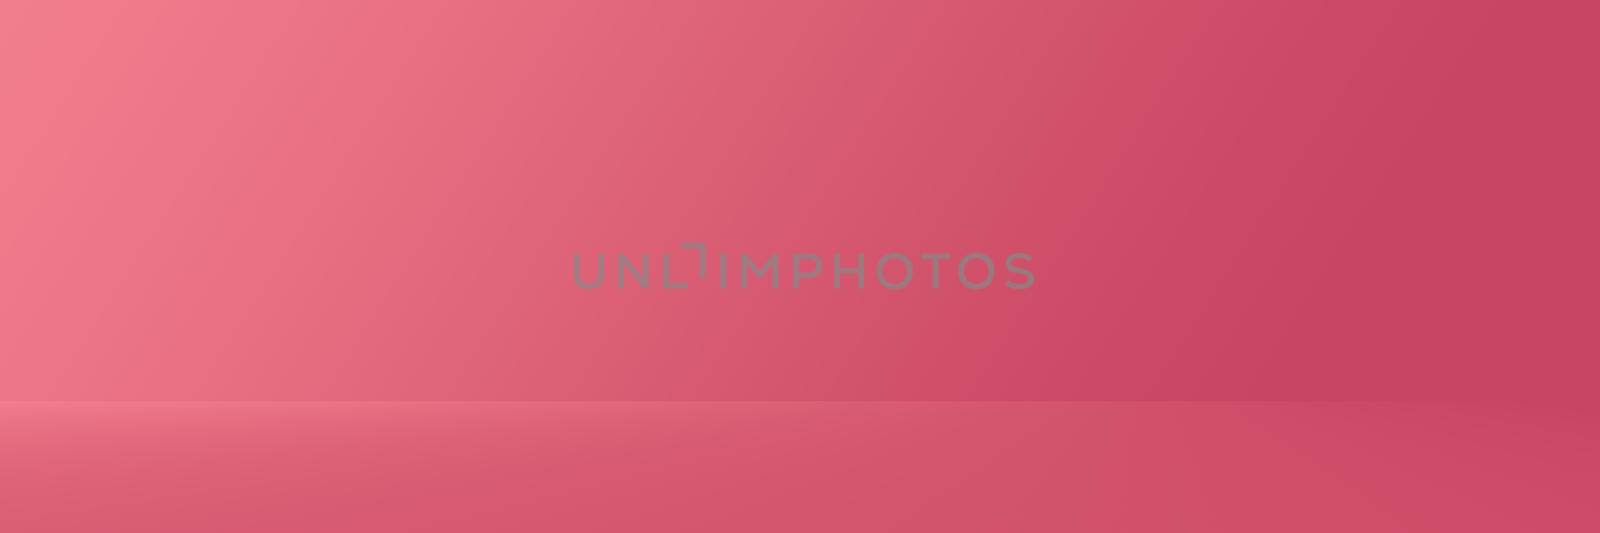 Studio Background - Abstract Bright luxury Pink Gradient horizontal studio room wall background for display product ad website template